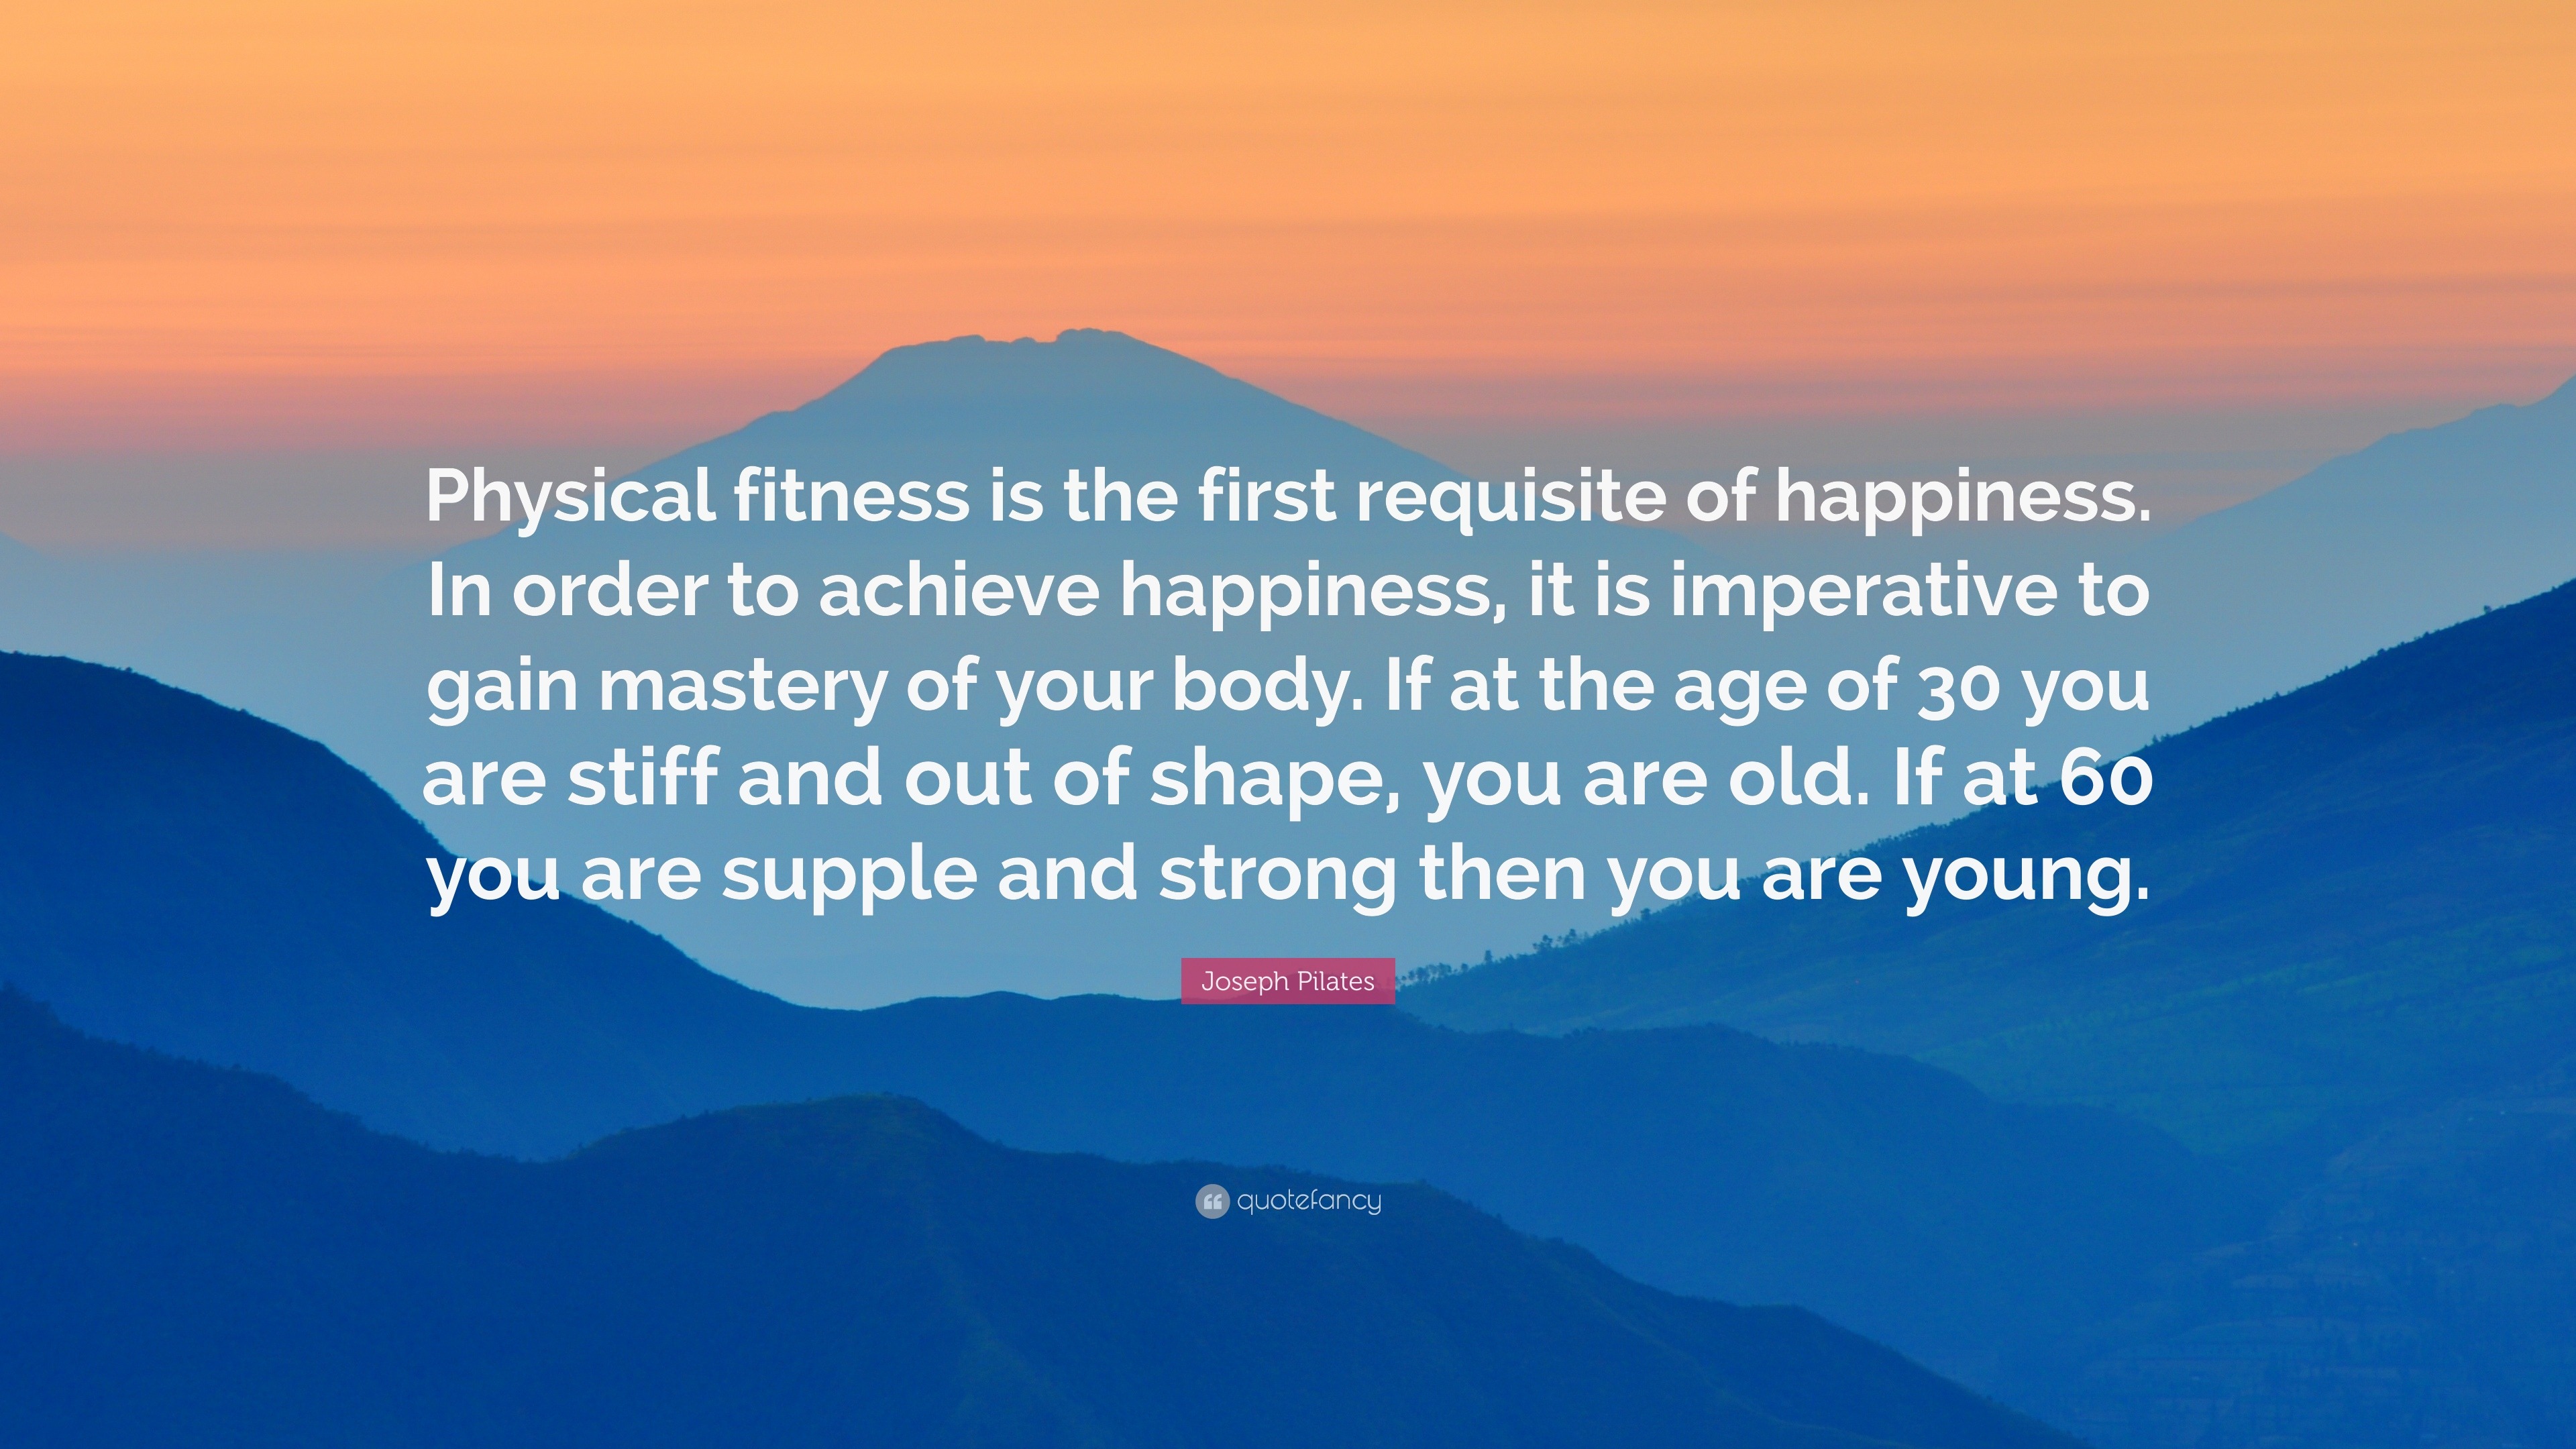 25 Joseph Pilates Quotes From the Founder of The Fitness Class